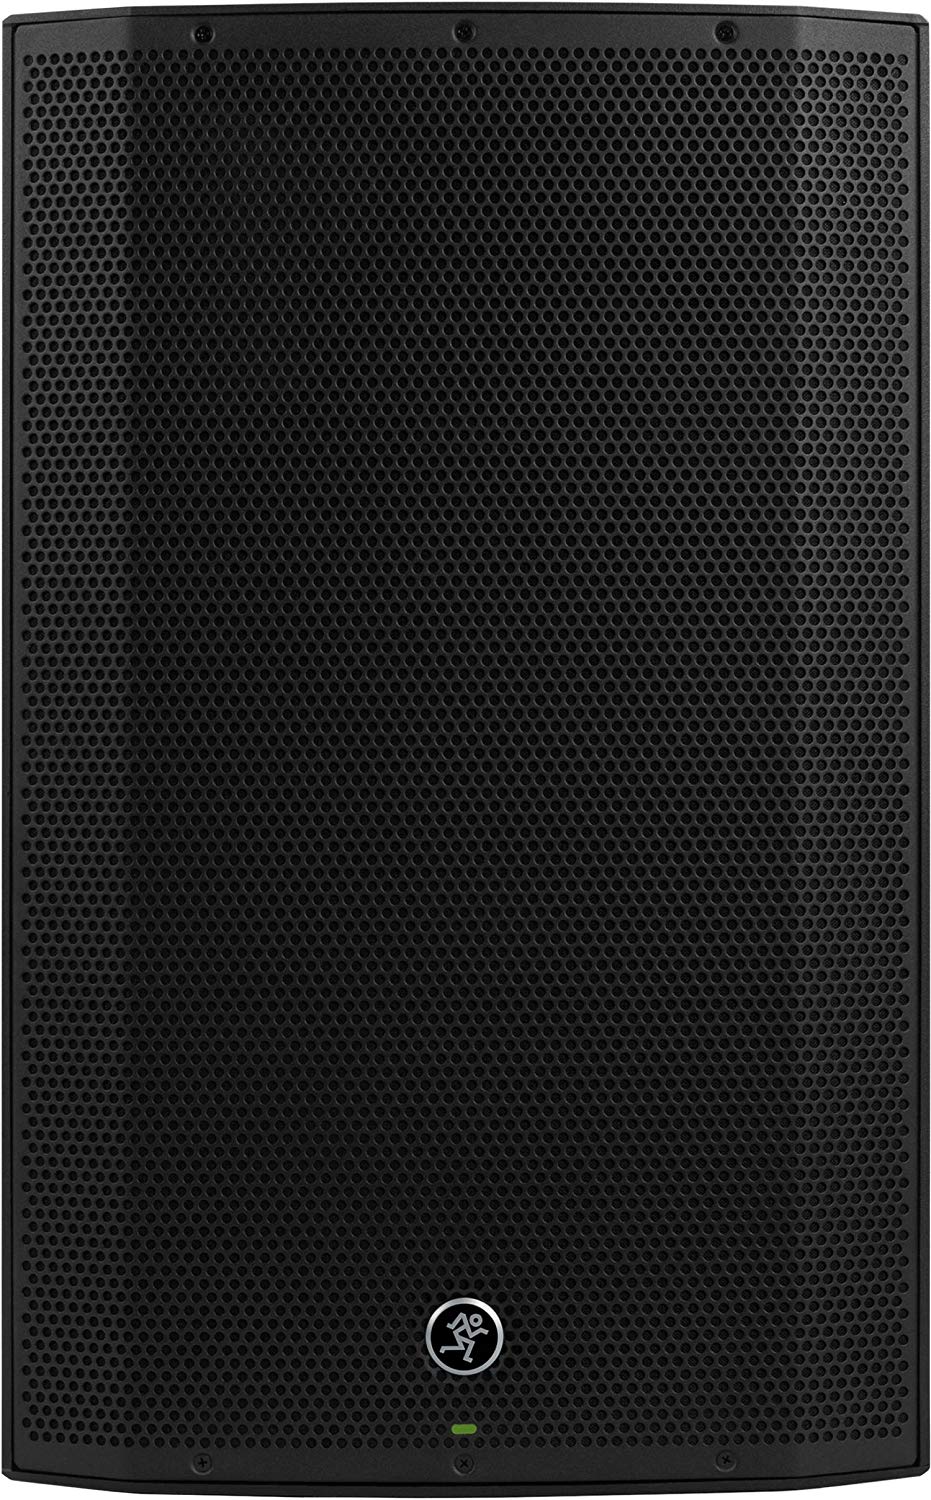 Discontinued: Mackie Thump15A 15 Inch Powered Loudspeaker by Mackie